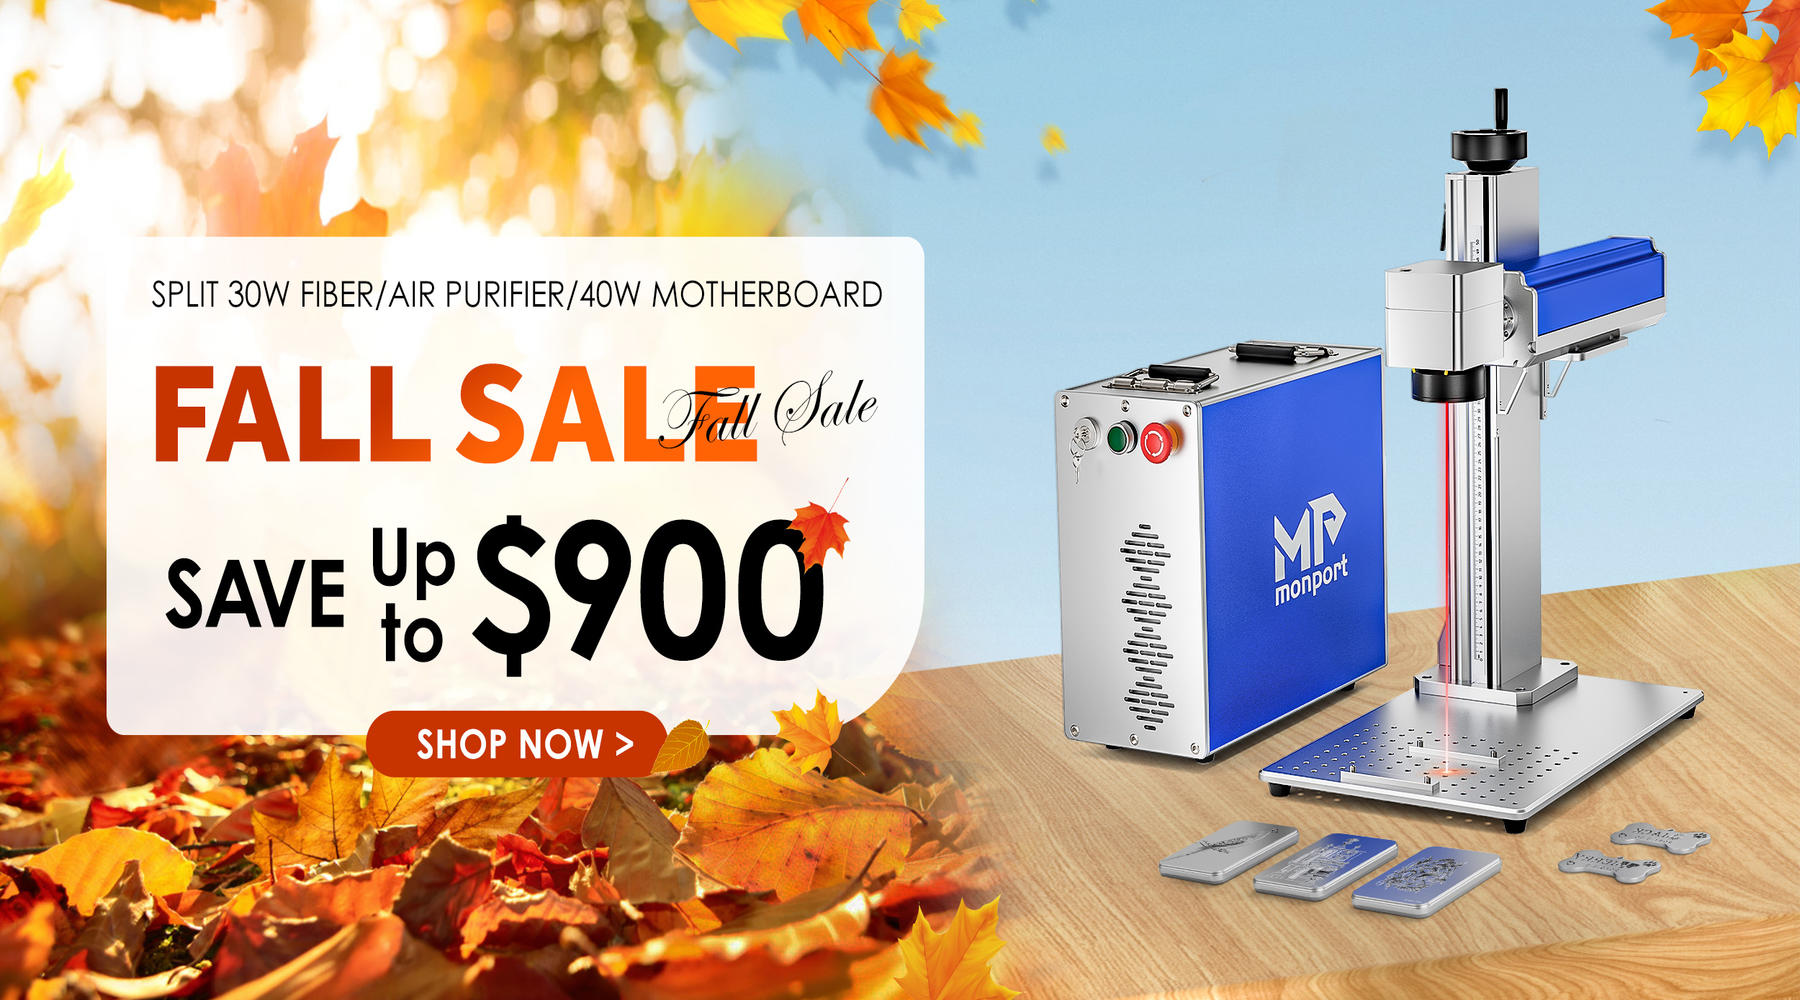 Upgrade Your Workspace This Fall with Monport's Exclusive Prices